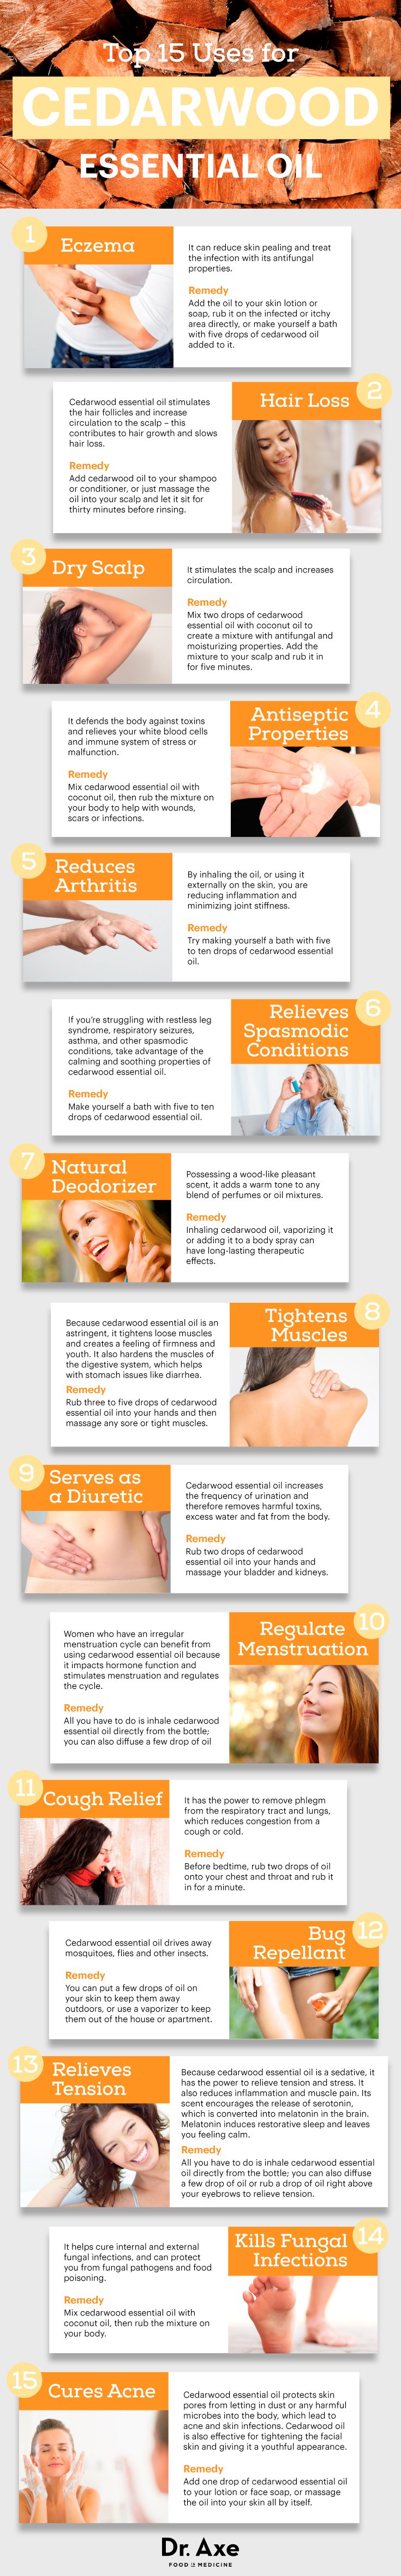 Cedarwood Essential Oil And Its Amazing Properties Infographic